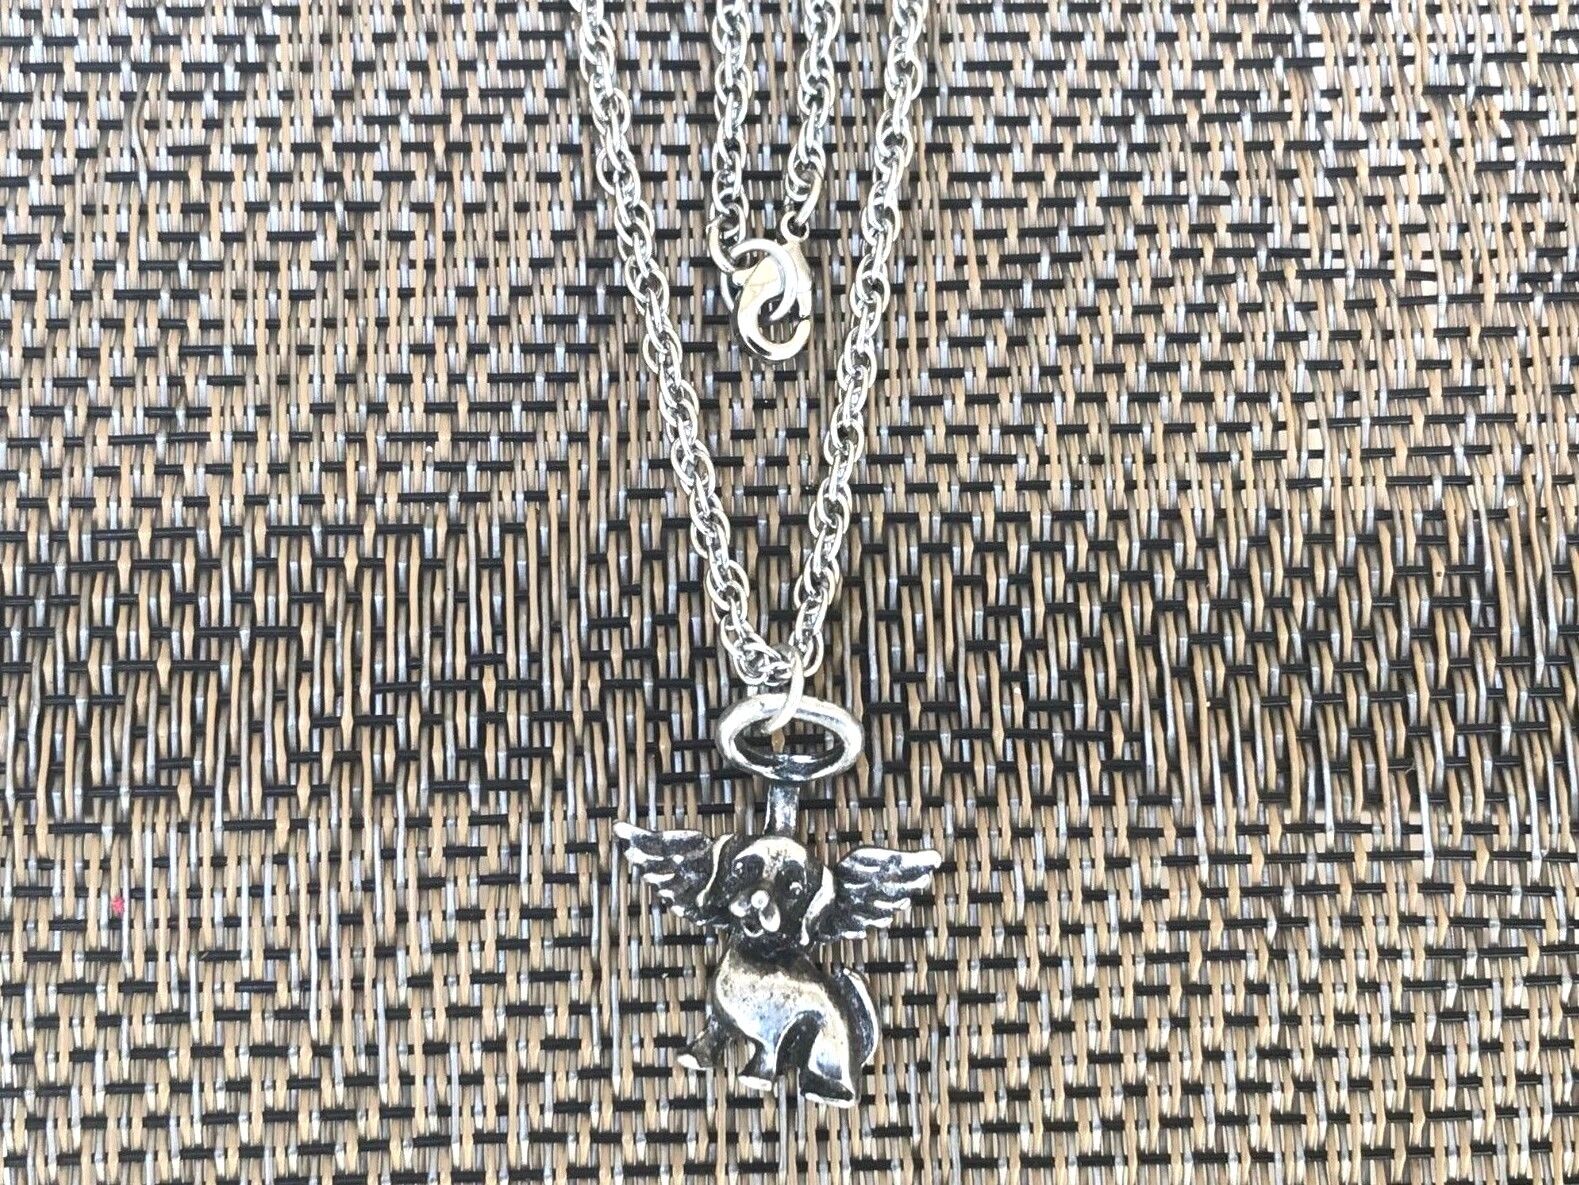 MAN BEST FRIEND ANIMAL JEWELRY 1 Nice PEWTER DOG ANGEL NECKLACE ALL NEW.